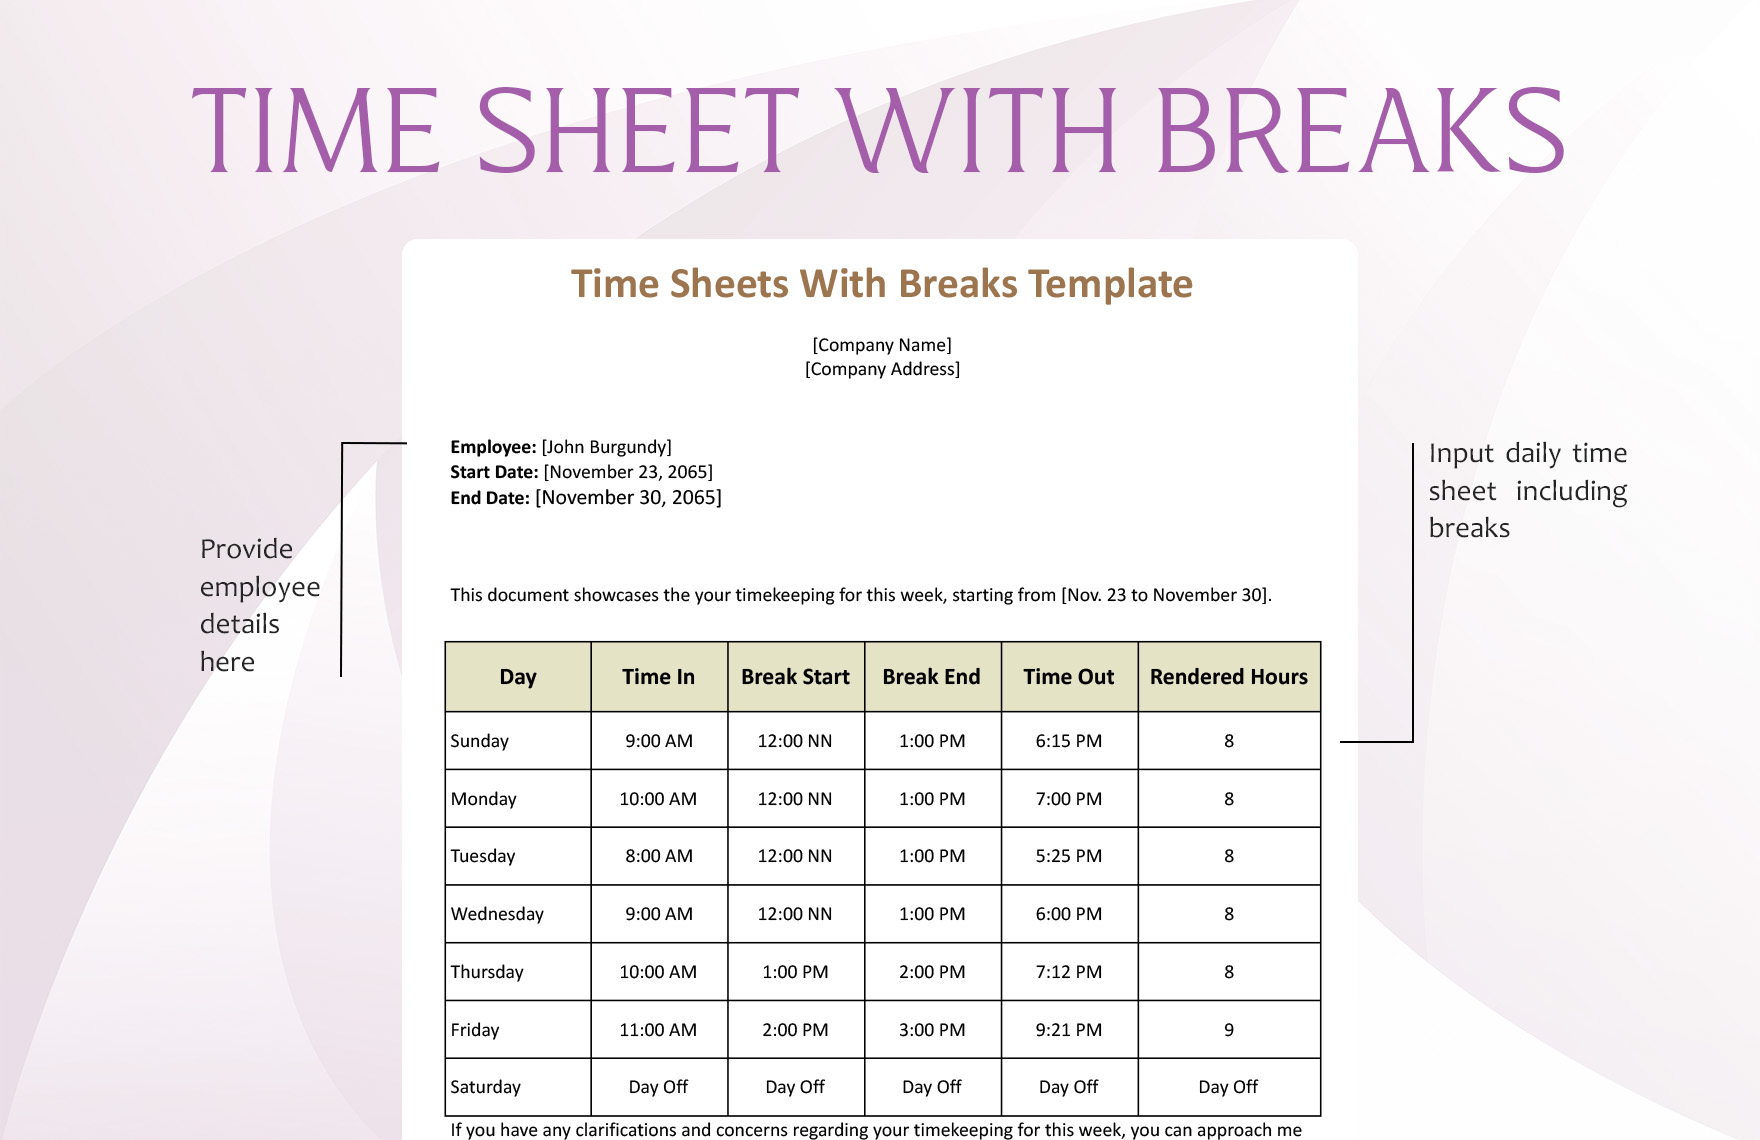 Time Sheet with Breaks Template